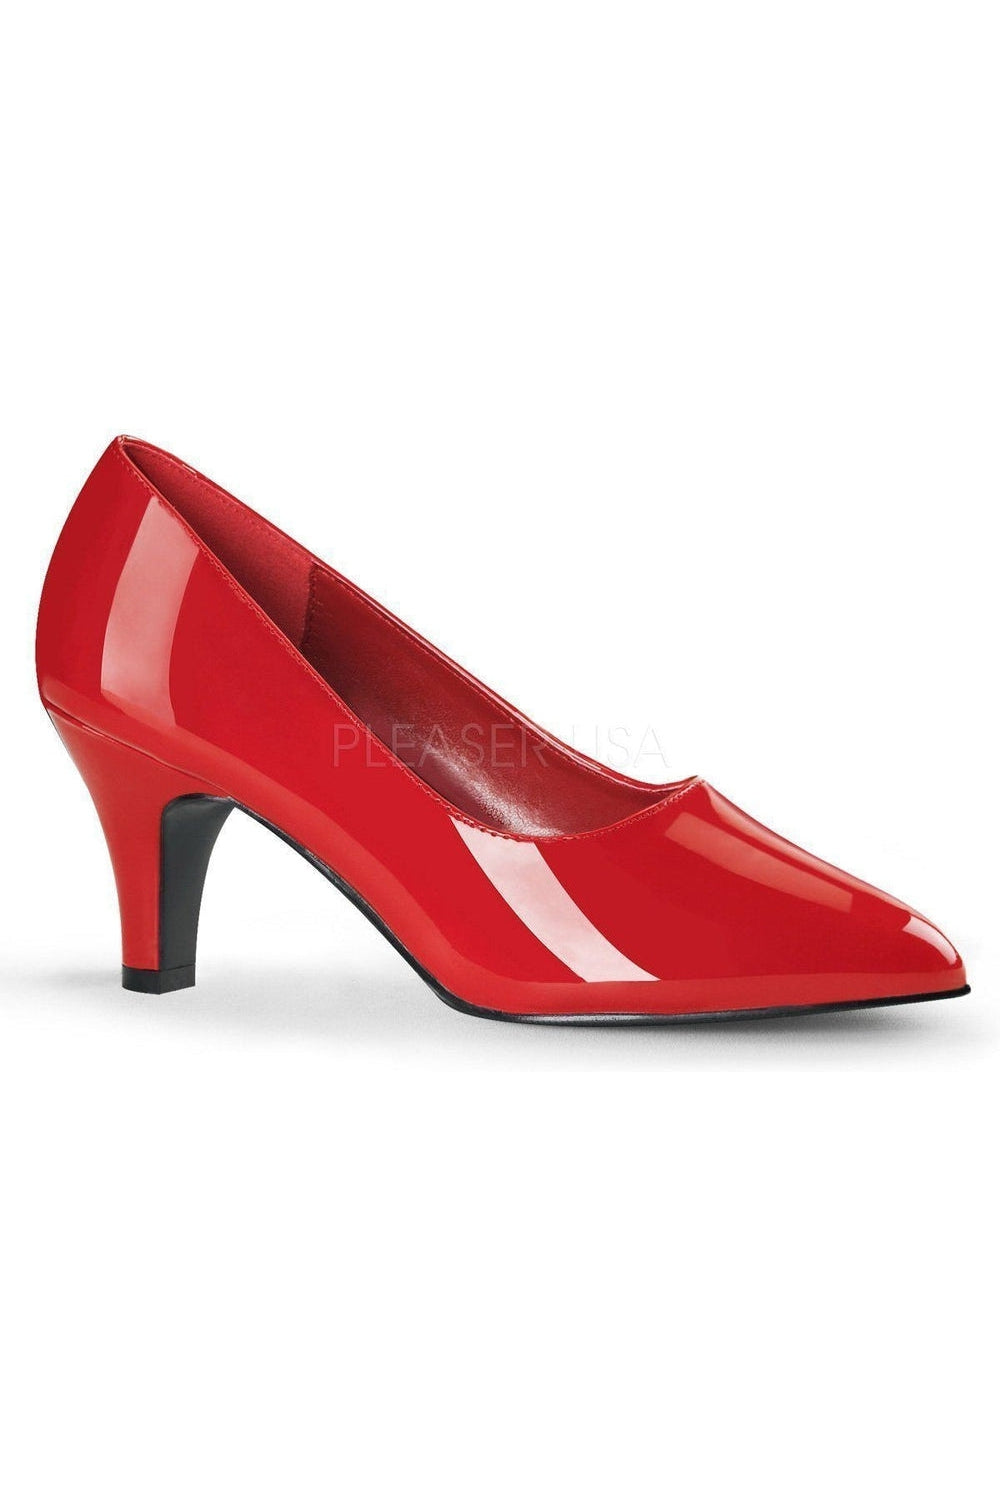 DIVINE-420 Pump | Red Patent-Pleaser Pink Label-Red-Pumps-SEXYSHOES.COM